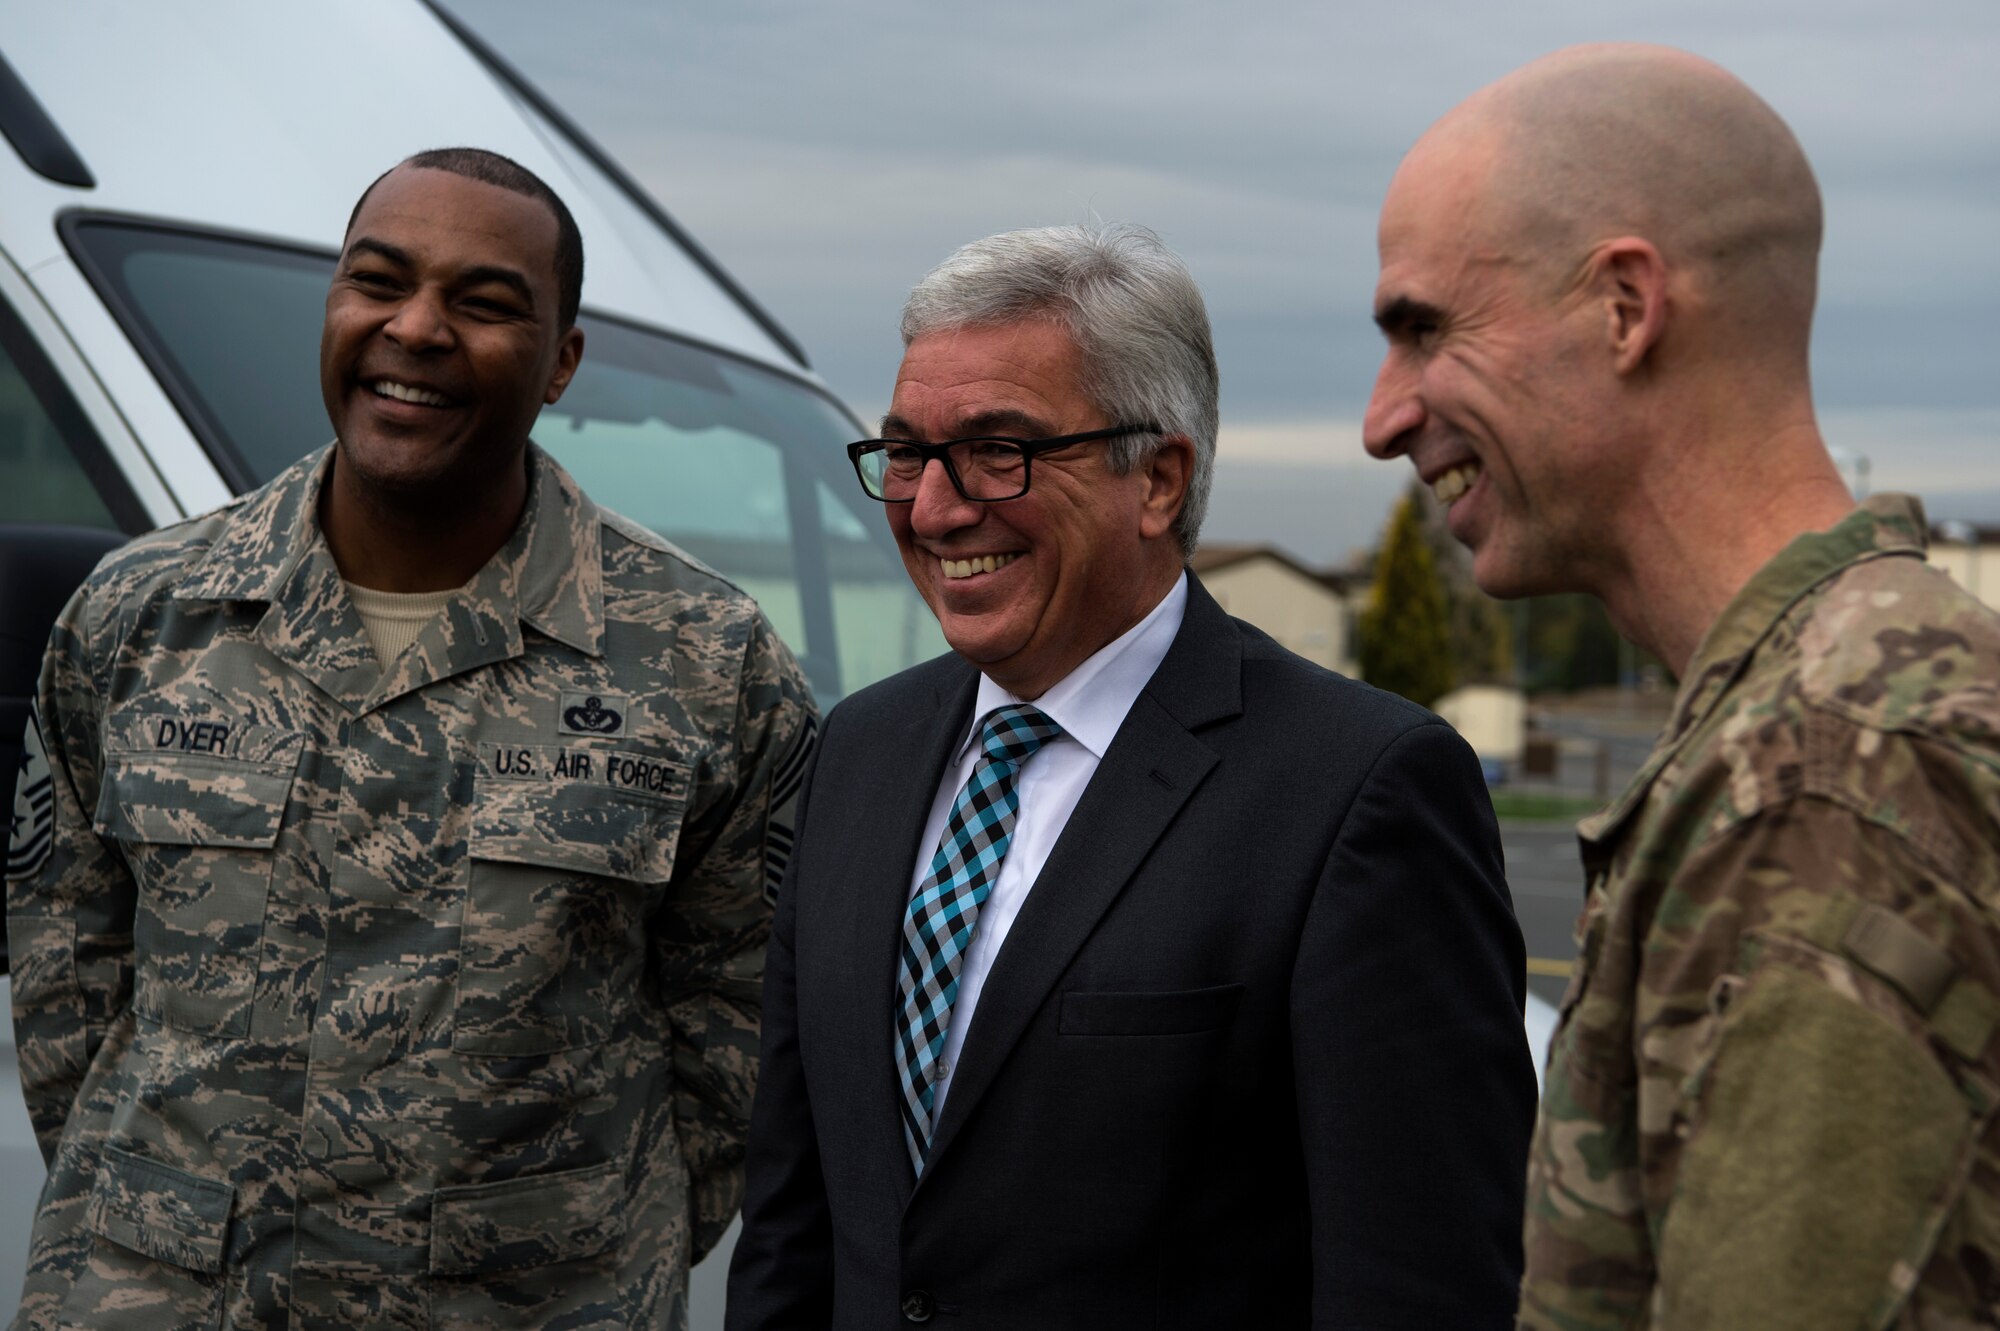 U.S. Air Force Col. Jason Bailey, 52nd Fighter Wing commander, right, and Chief Master Sgt. Alvin Dyer, 52nd FW command chief, left, speak with Roger Lewentz, Minister of the Interior of Rhineland-Palatinate, Germany, center, at Spangdahlem Air Base, Germany, Oct. 22, 2018. The department of the Ministry of the Interior is responsible for the state's communication with military forces. (U.S. Air Force photo by Airman 1st Class Valerie Seelye)